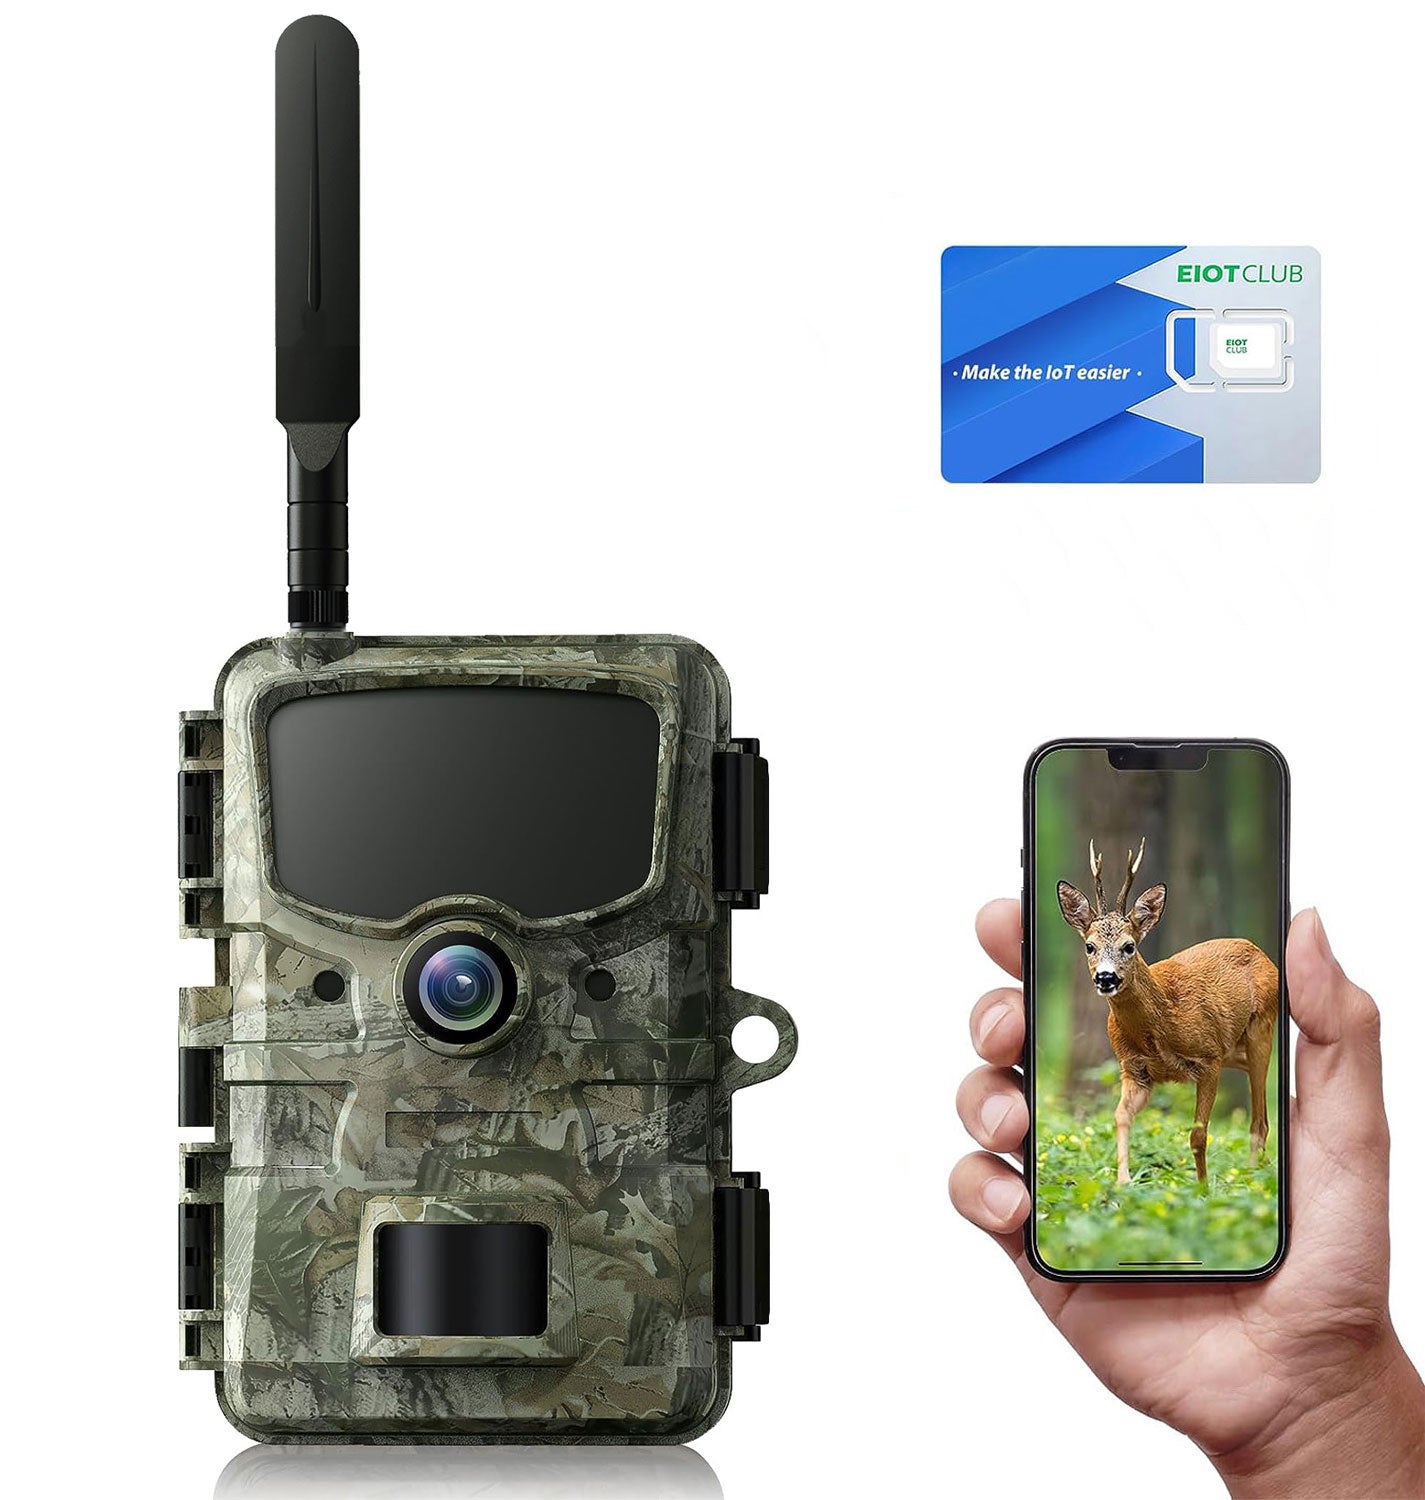 CAMPARK 4G LTE Cellular Trail Camera Sends Picture Video to Cell Phone - Game Hunting Camera 24MP 1080P with Night Vision Motion Activated Waterproof for Wildlife Monitoring Trail Cam with SD Card